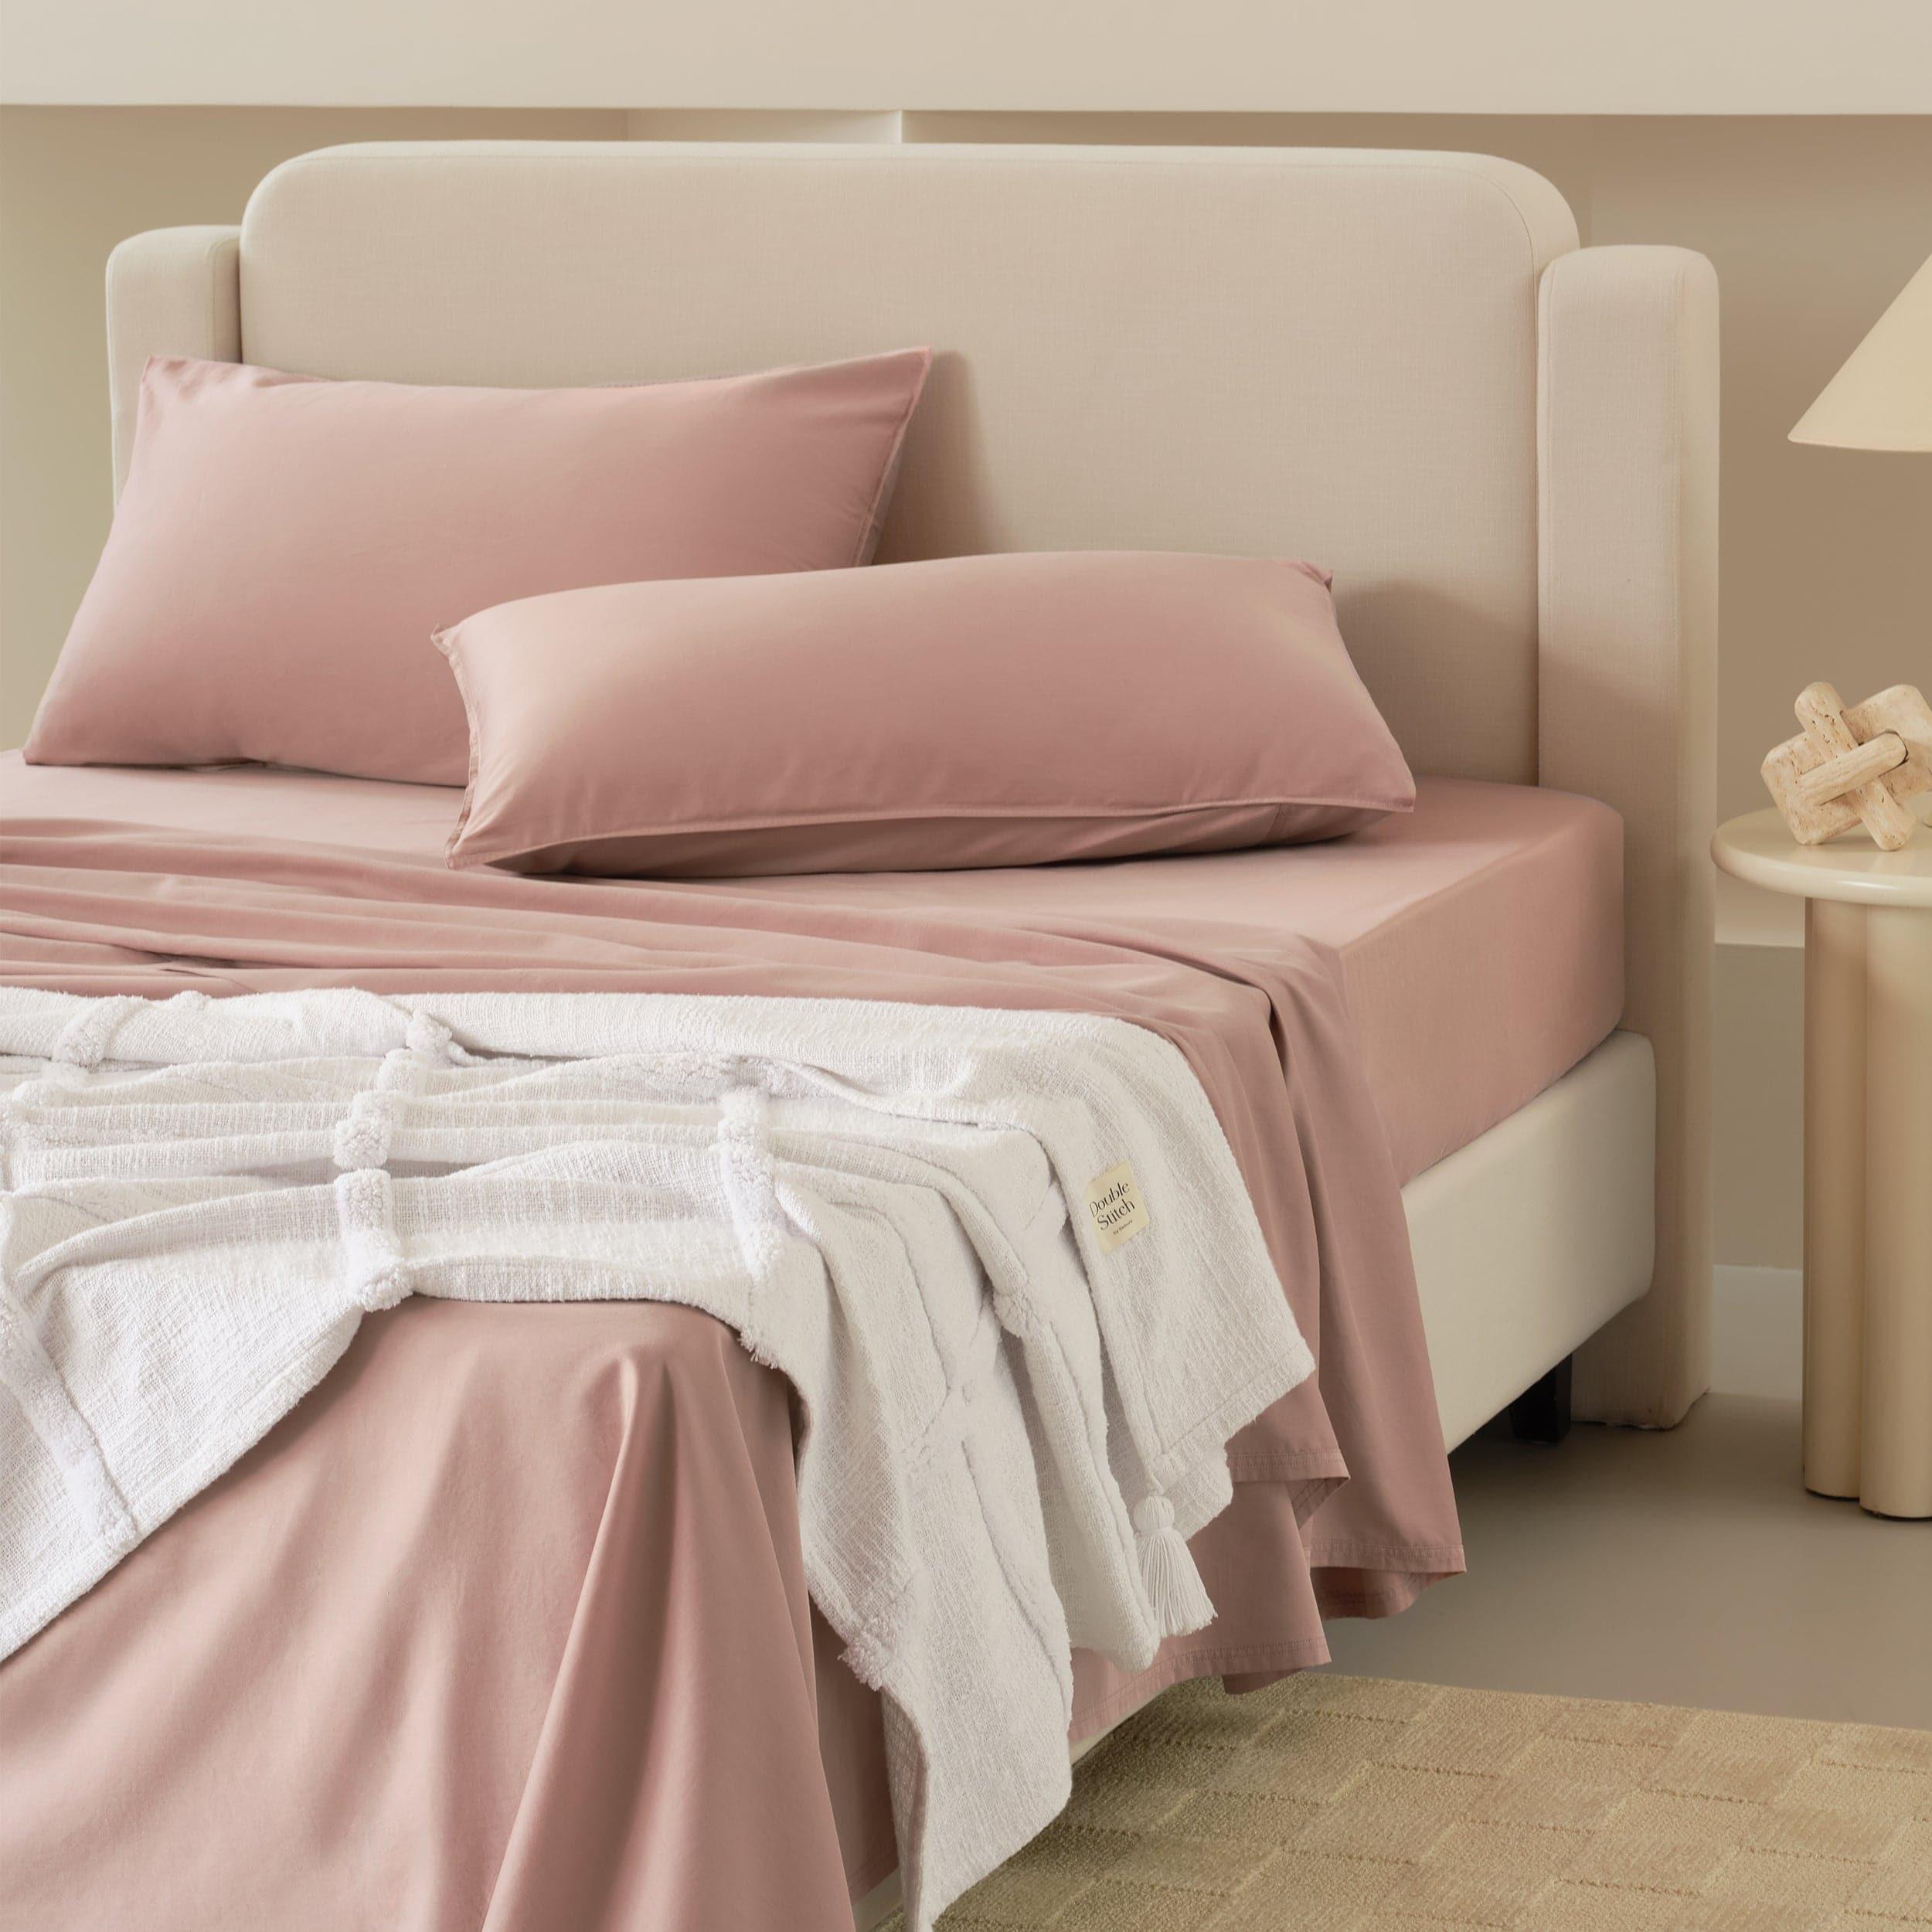 Complete your bedding ensemble with a queen size sheet set.